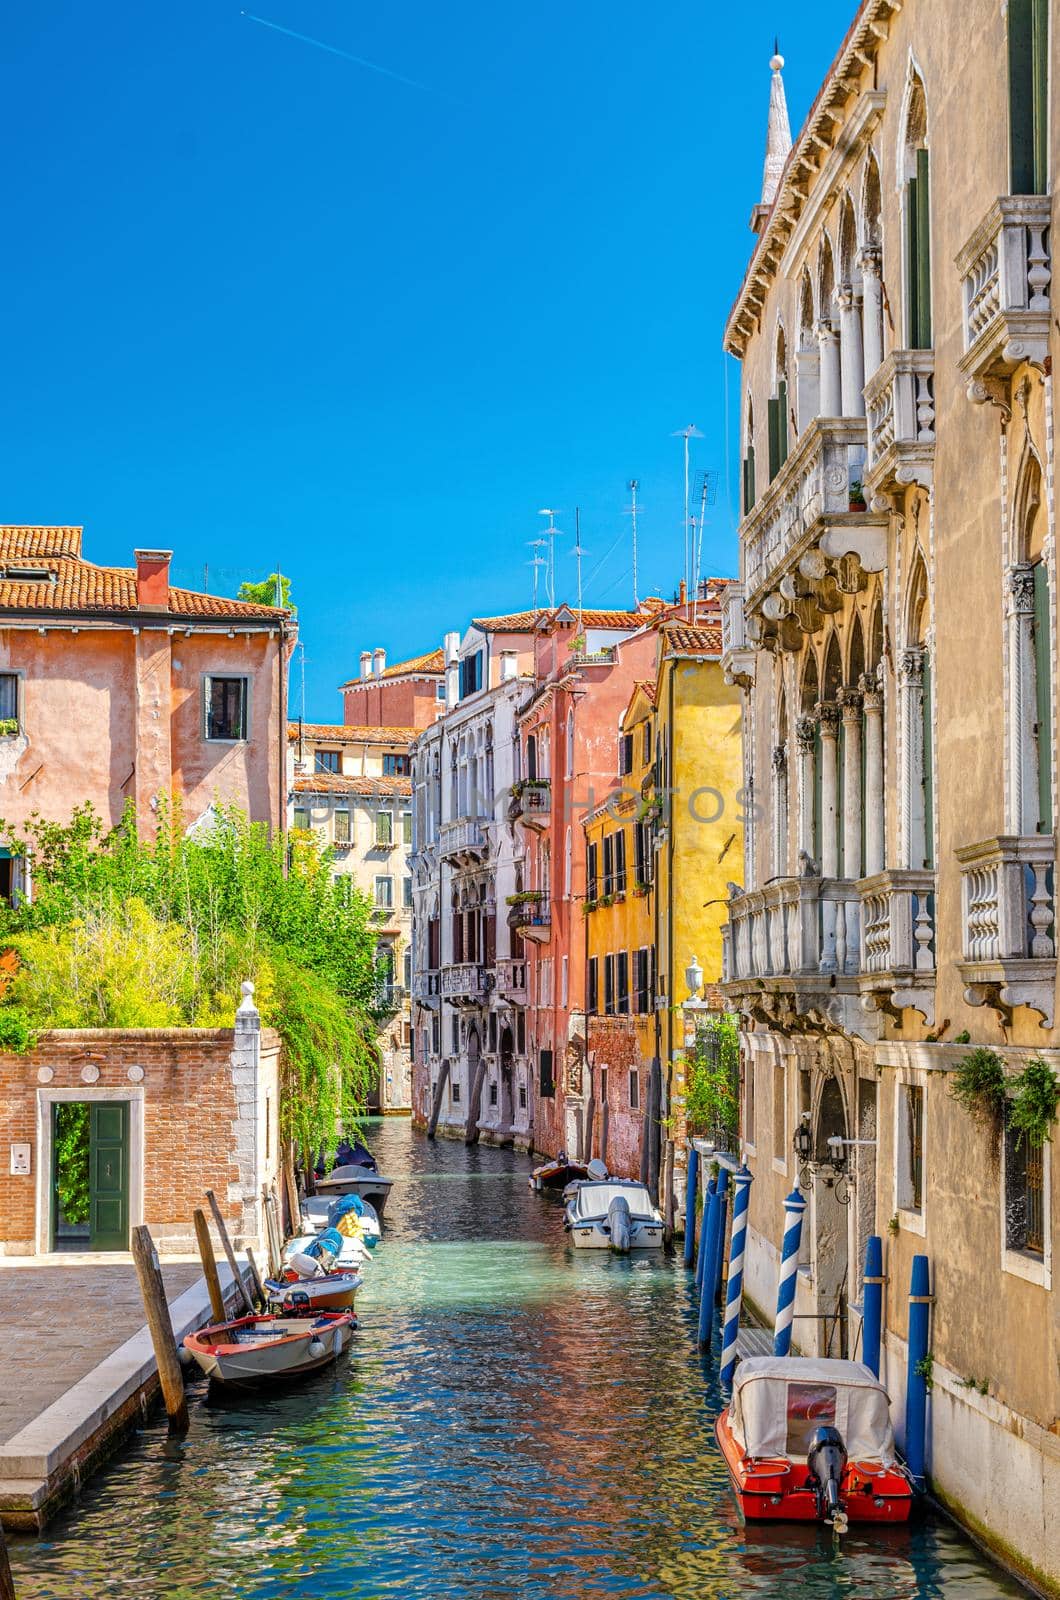 Typical Venice narrow water canal with moored boats between old colorful buildings with balconies and brick walls, Veneto Region, Northern Italy. Traditional Venetian cityscape, blue sky background.